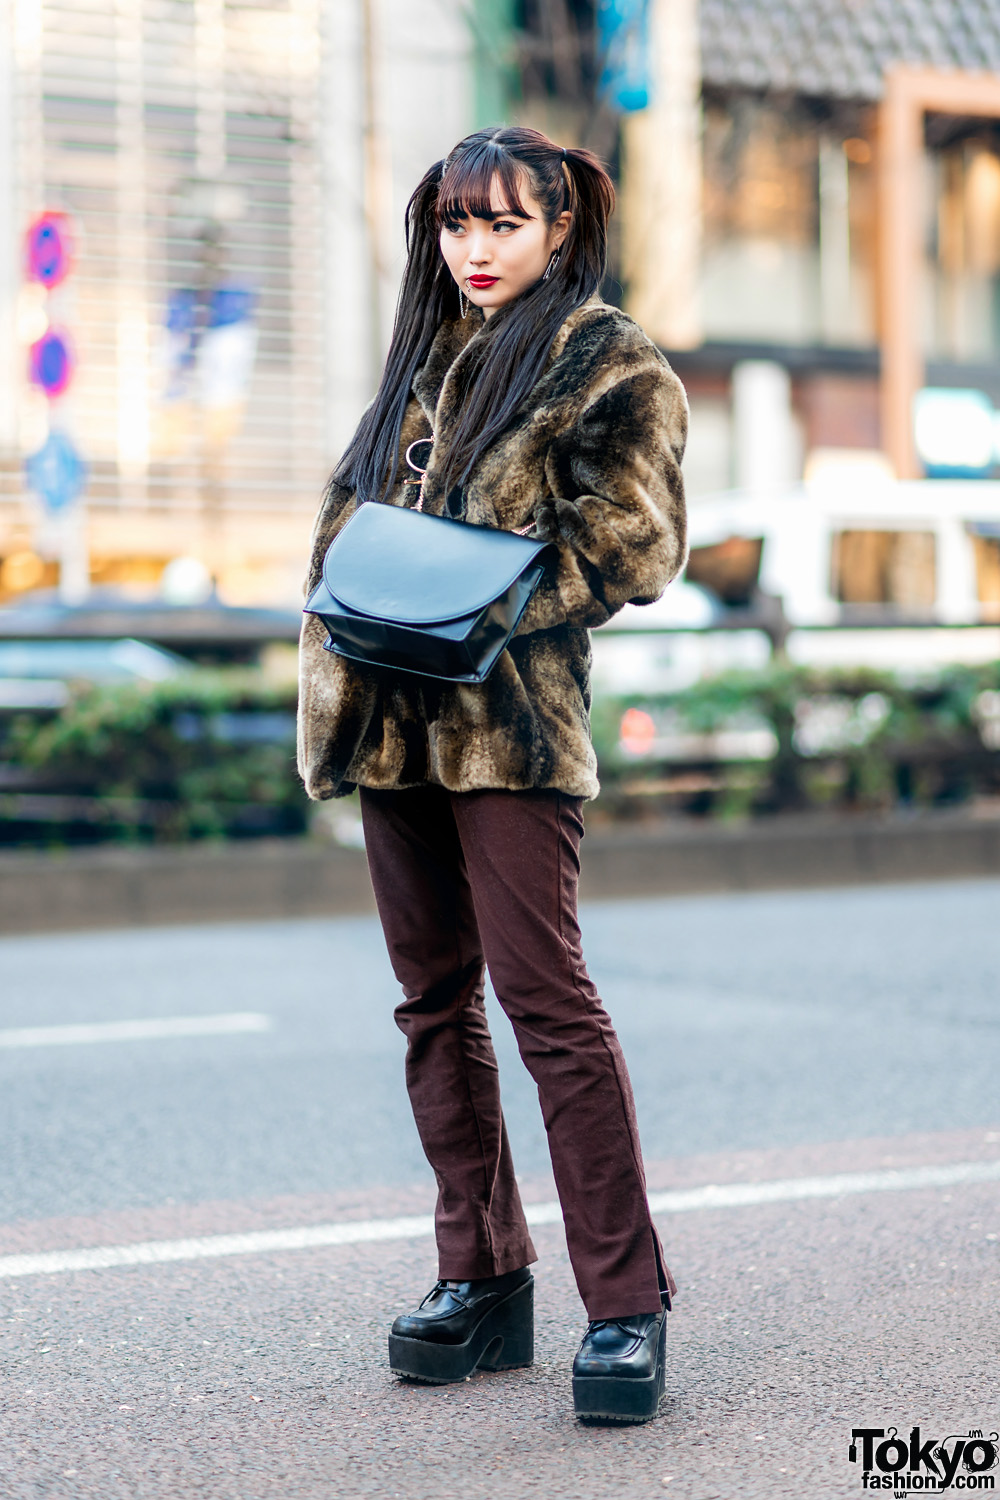 Chic Tokyo Streetwear Style w/ Twin Tails, Lip-To-Ear Chain, Faux Fur Jacket, Leather Flap Bag & Platform Booties